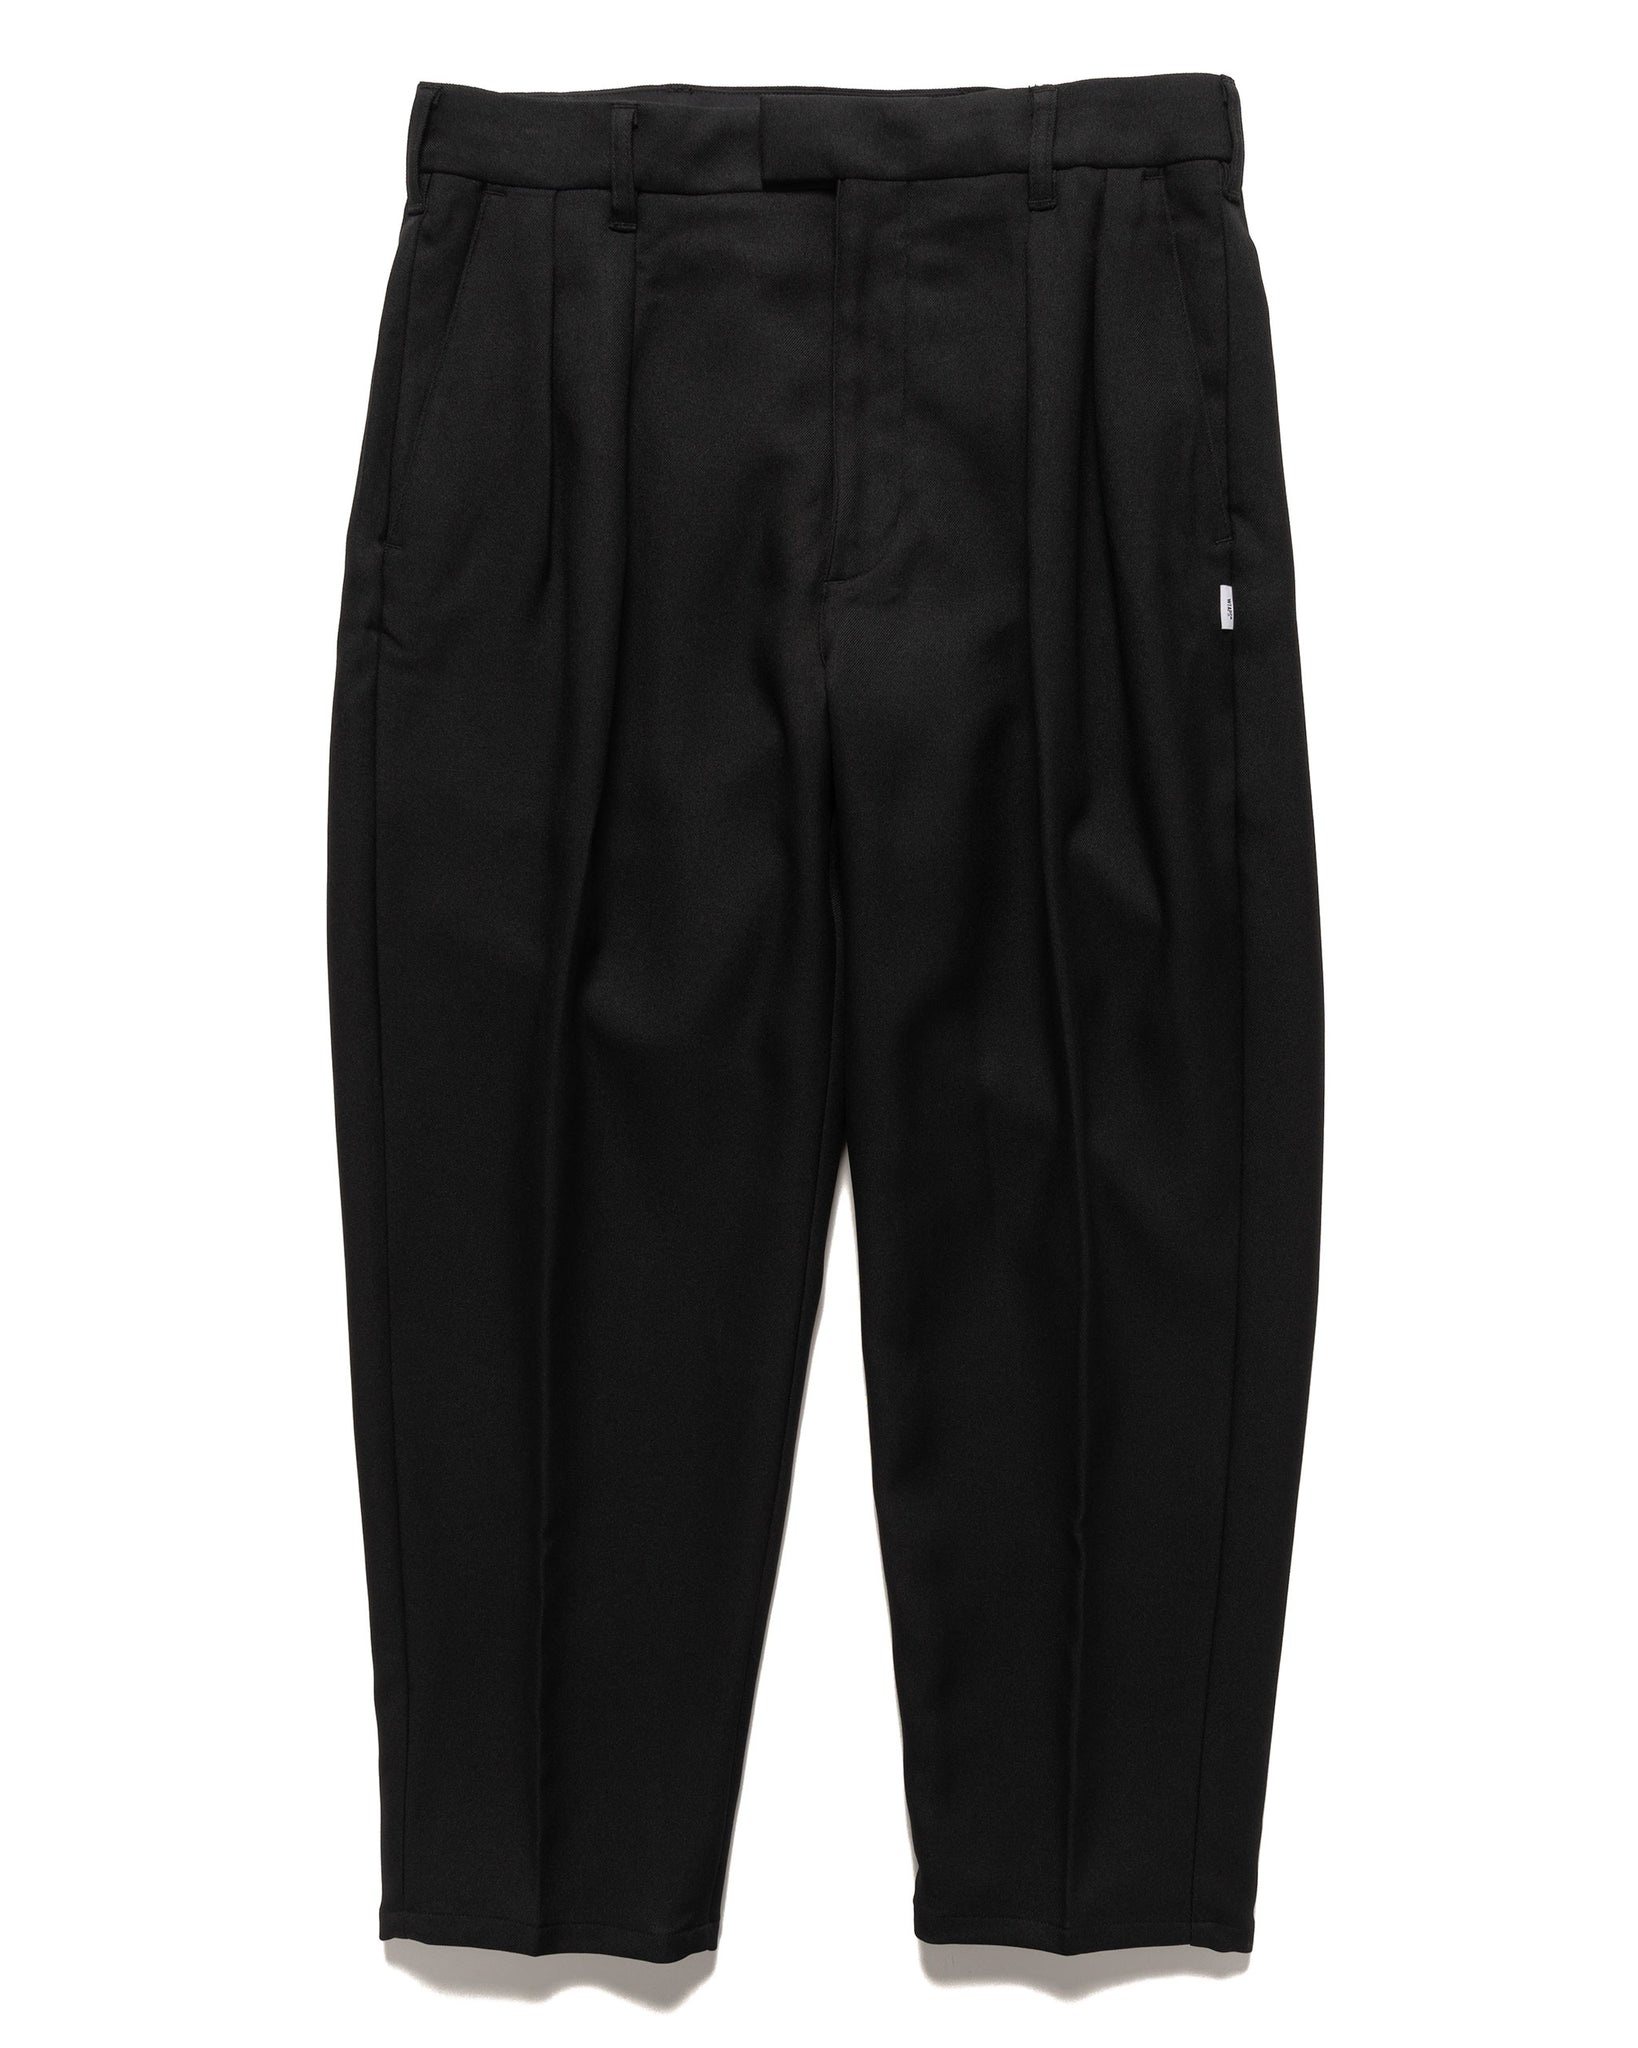 WTAPS TRDT1801 / TROUSERS / POLY. TWILL